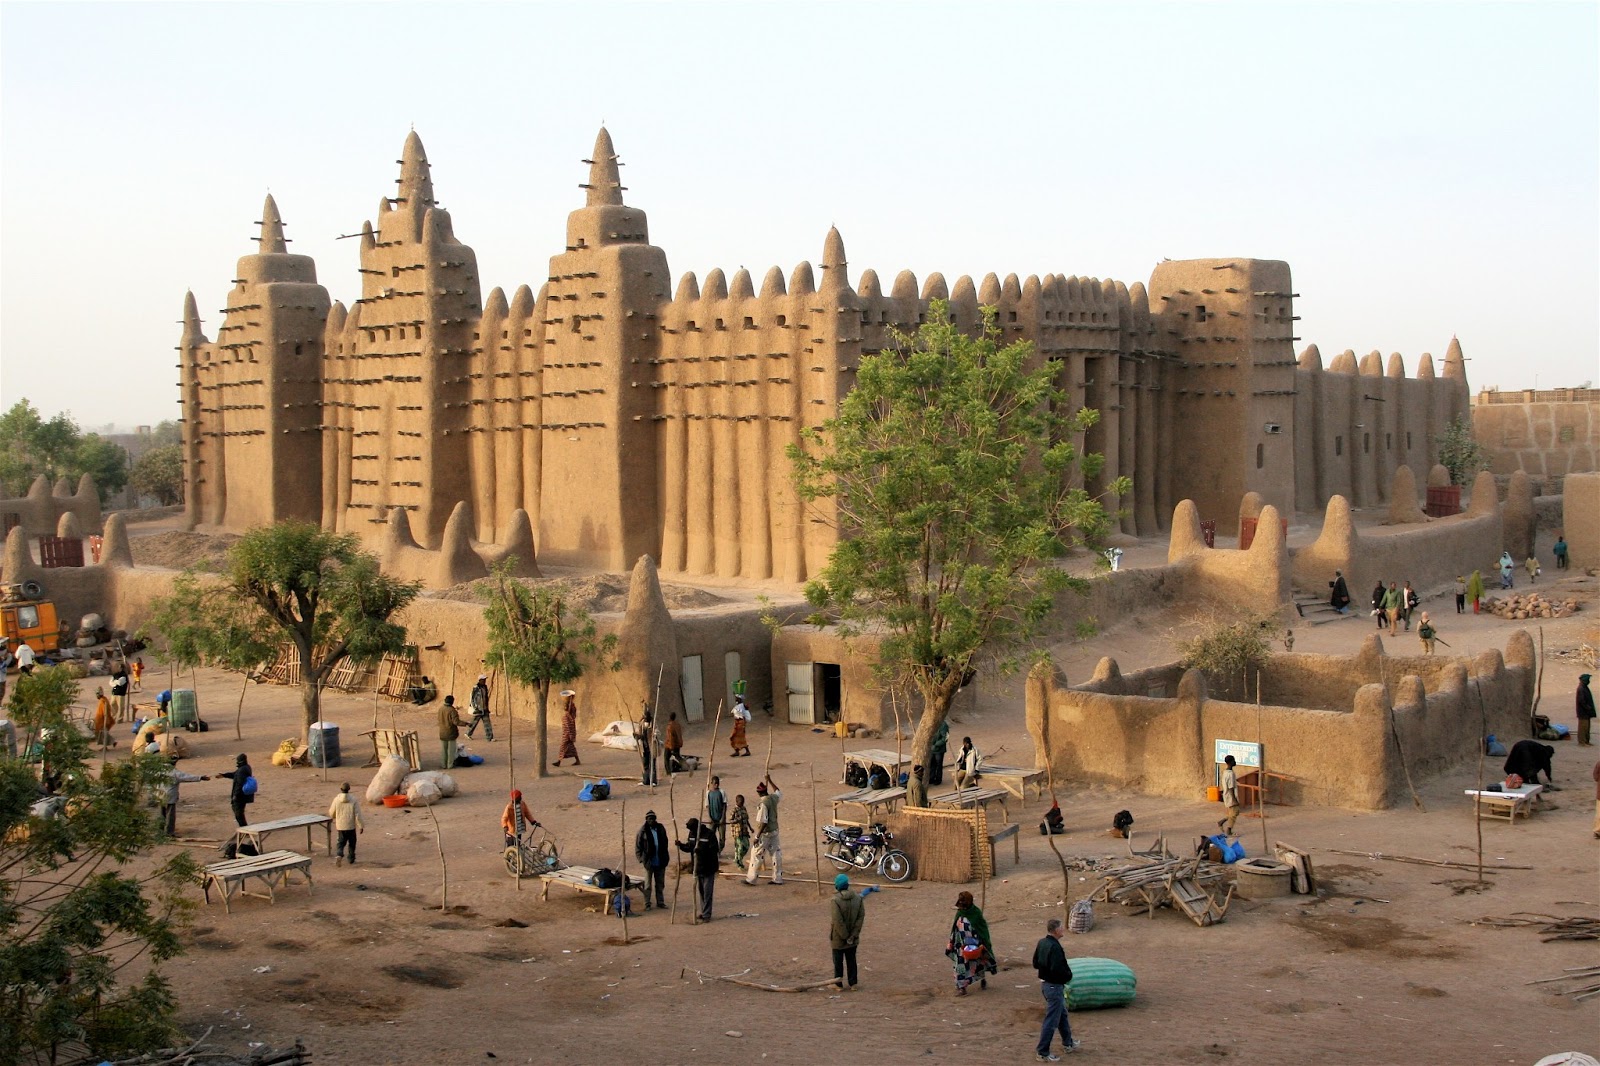 The Great Mosque Djenne Mali